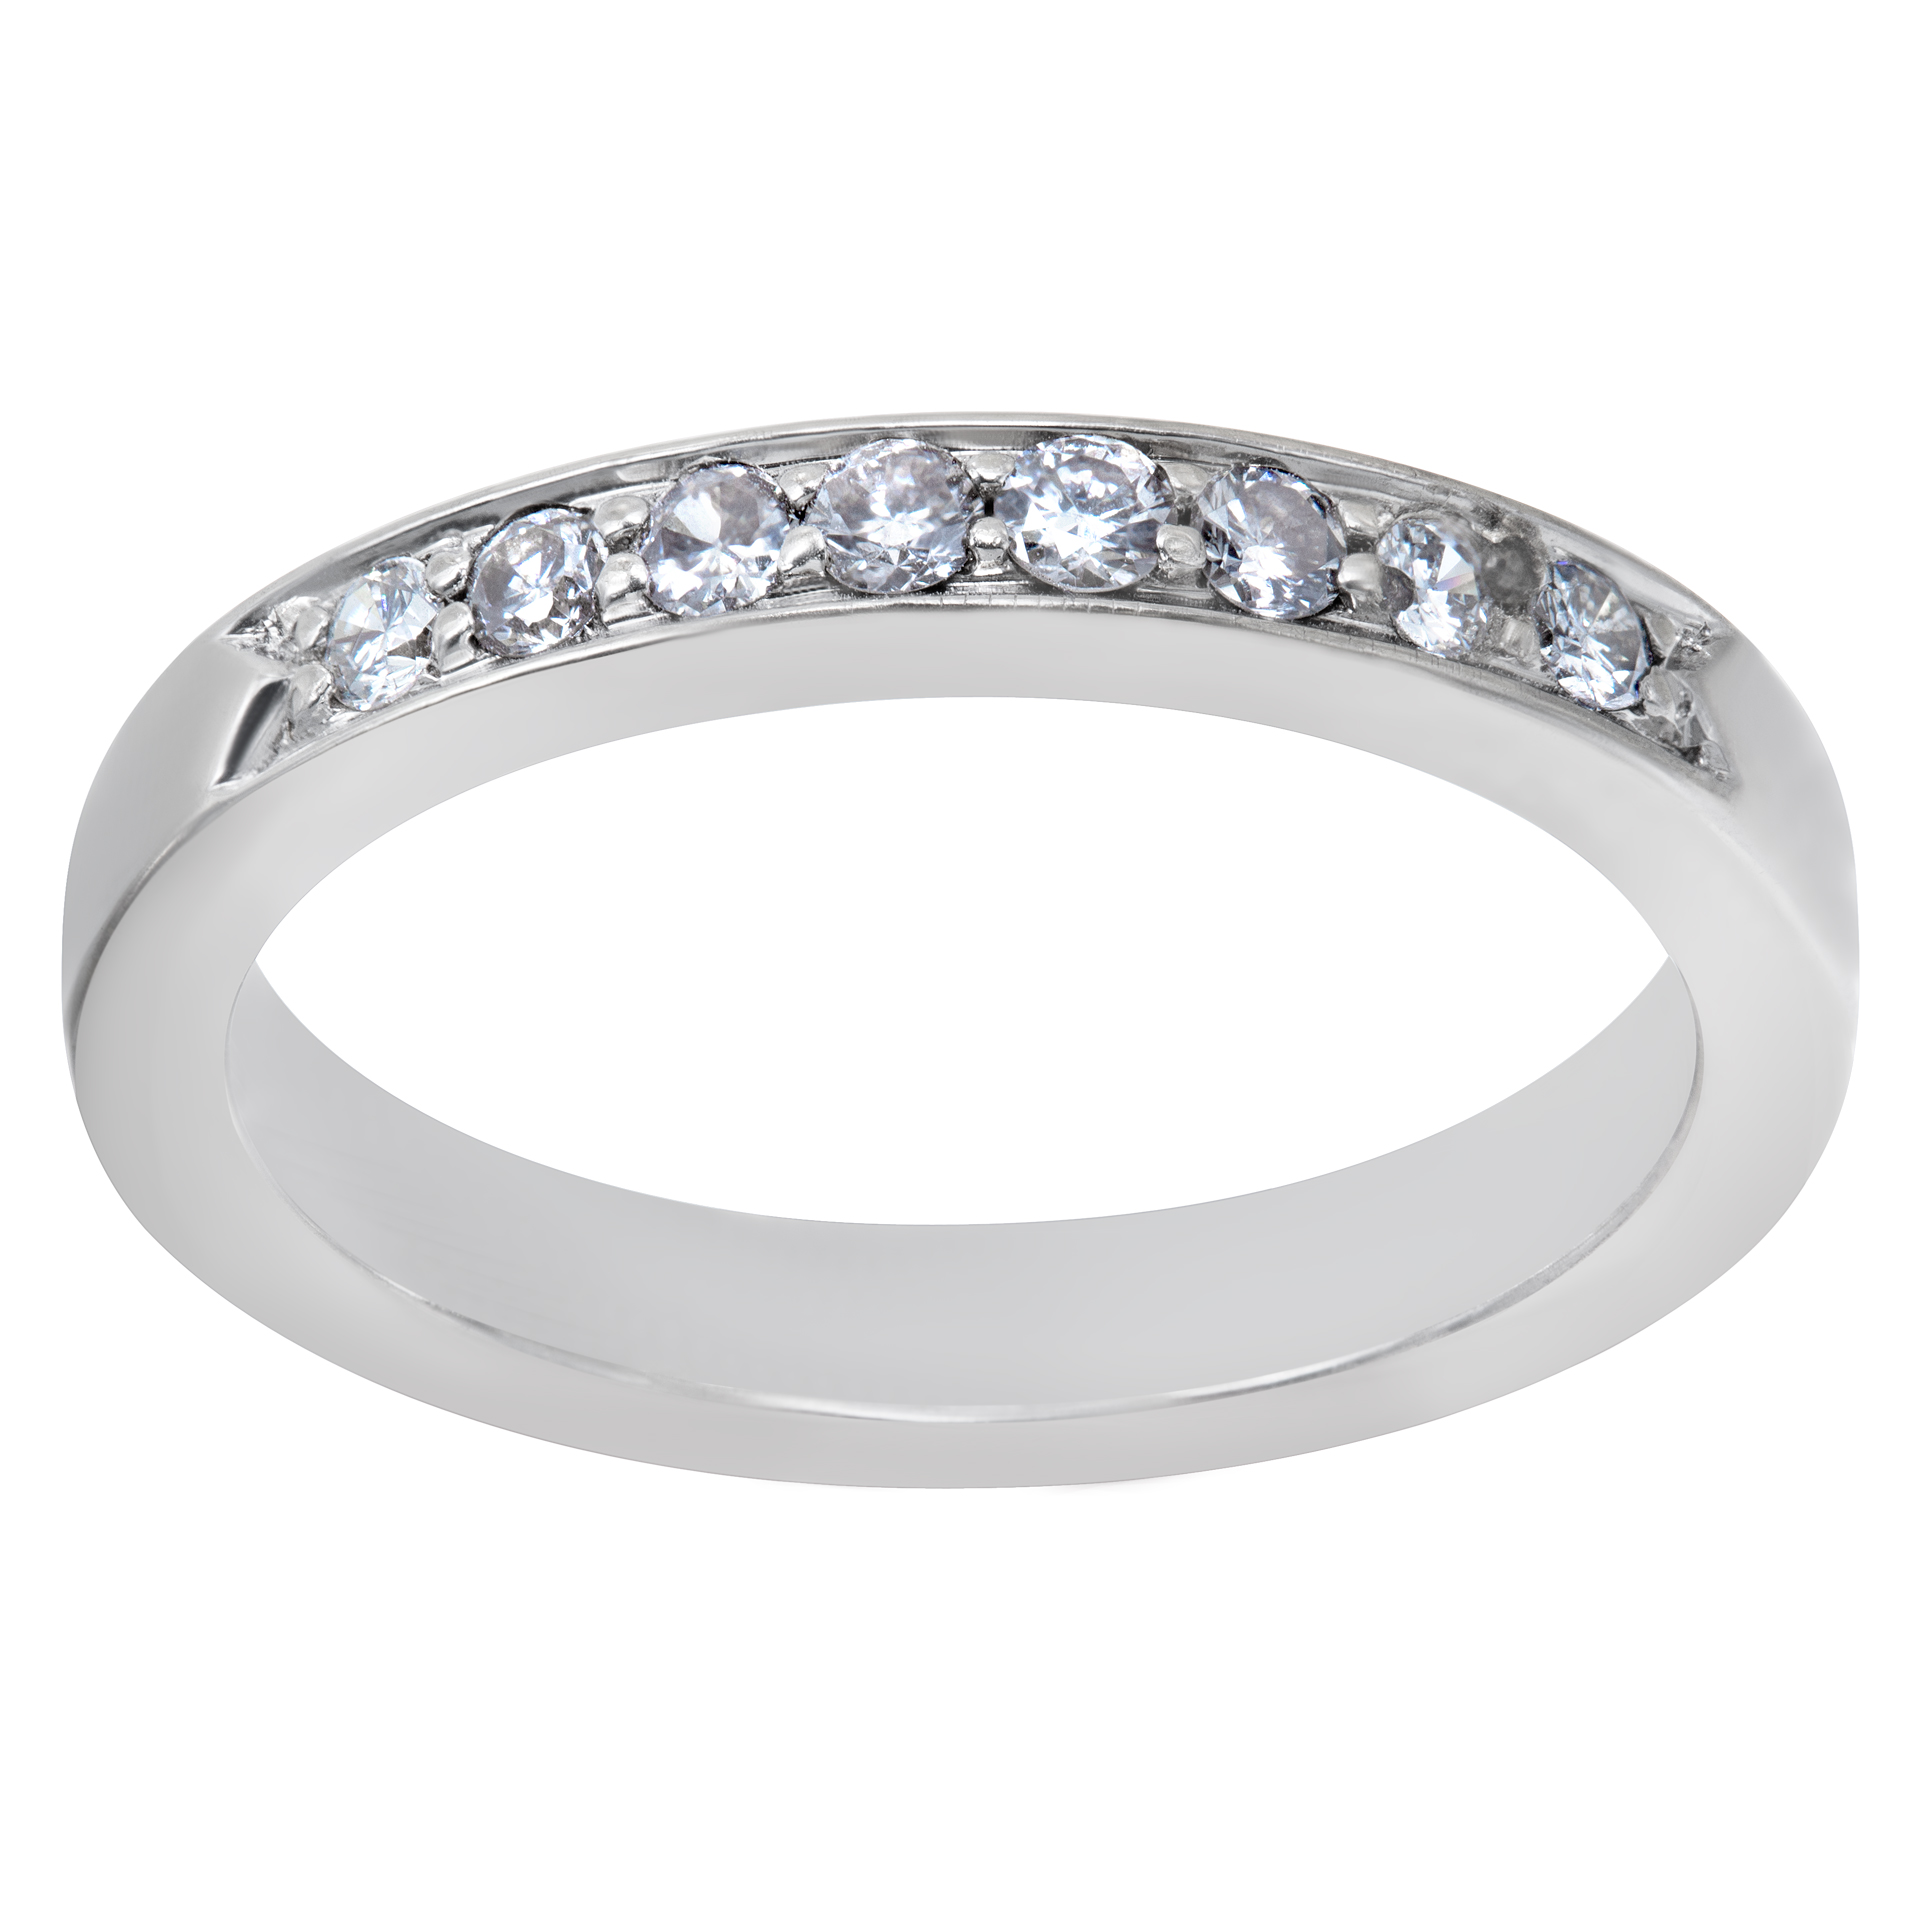 18k white gold semi-eternity diamond ring with approx 0.50 cts in diamonds I-J color SI clarity. Size 6.25.